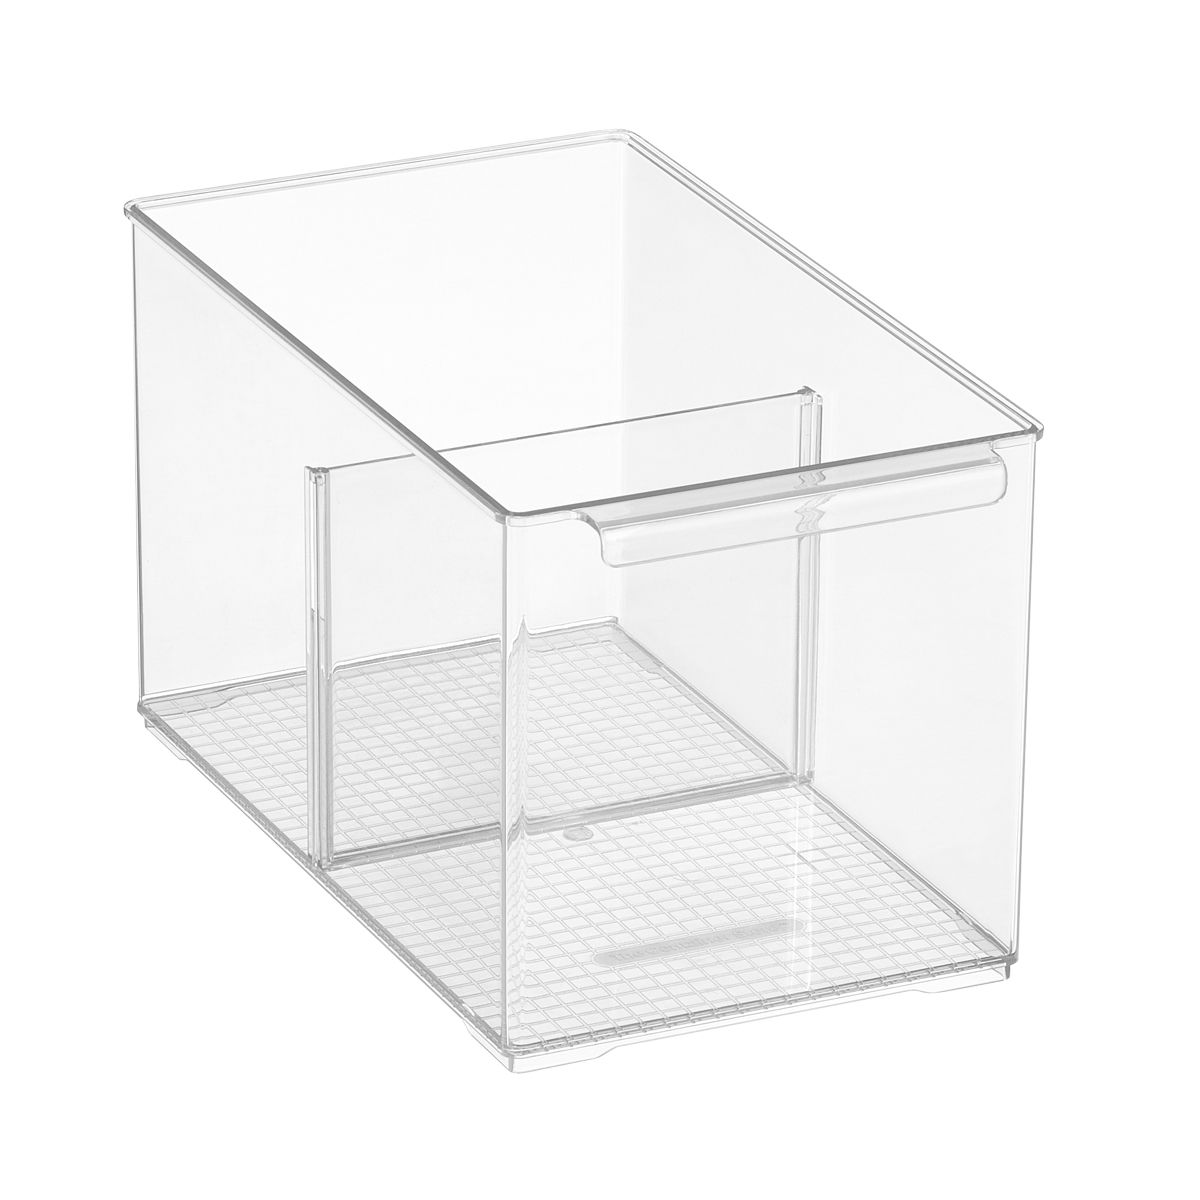 Cabinet-Depth Pantry Bins with Divider | The Container Store